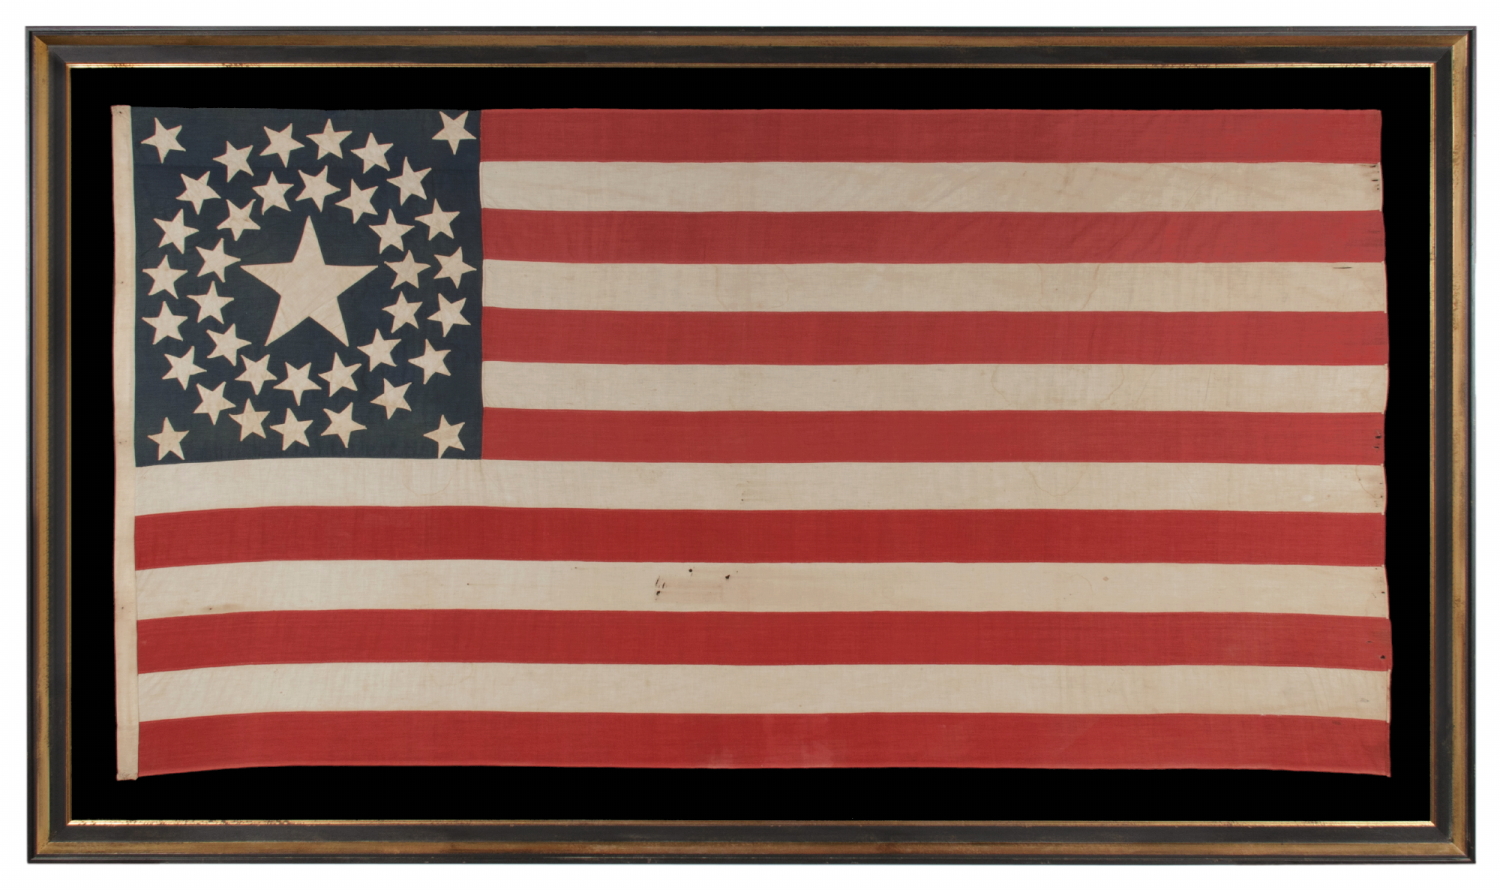 38 STAR ANTIQUE AMERICAN FLAG WITH A DOUBLE-WREATH CONFIGURATION THAT FEATURES AN ENORMOUS CENTER STAR, REFLECTS THE PERIOD OF COLORADO STATEHOOD, 1876-1889